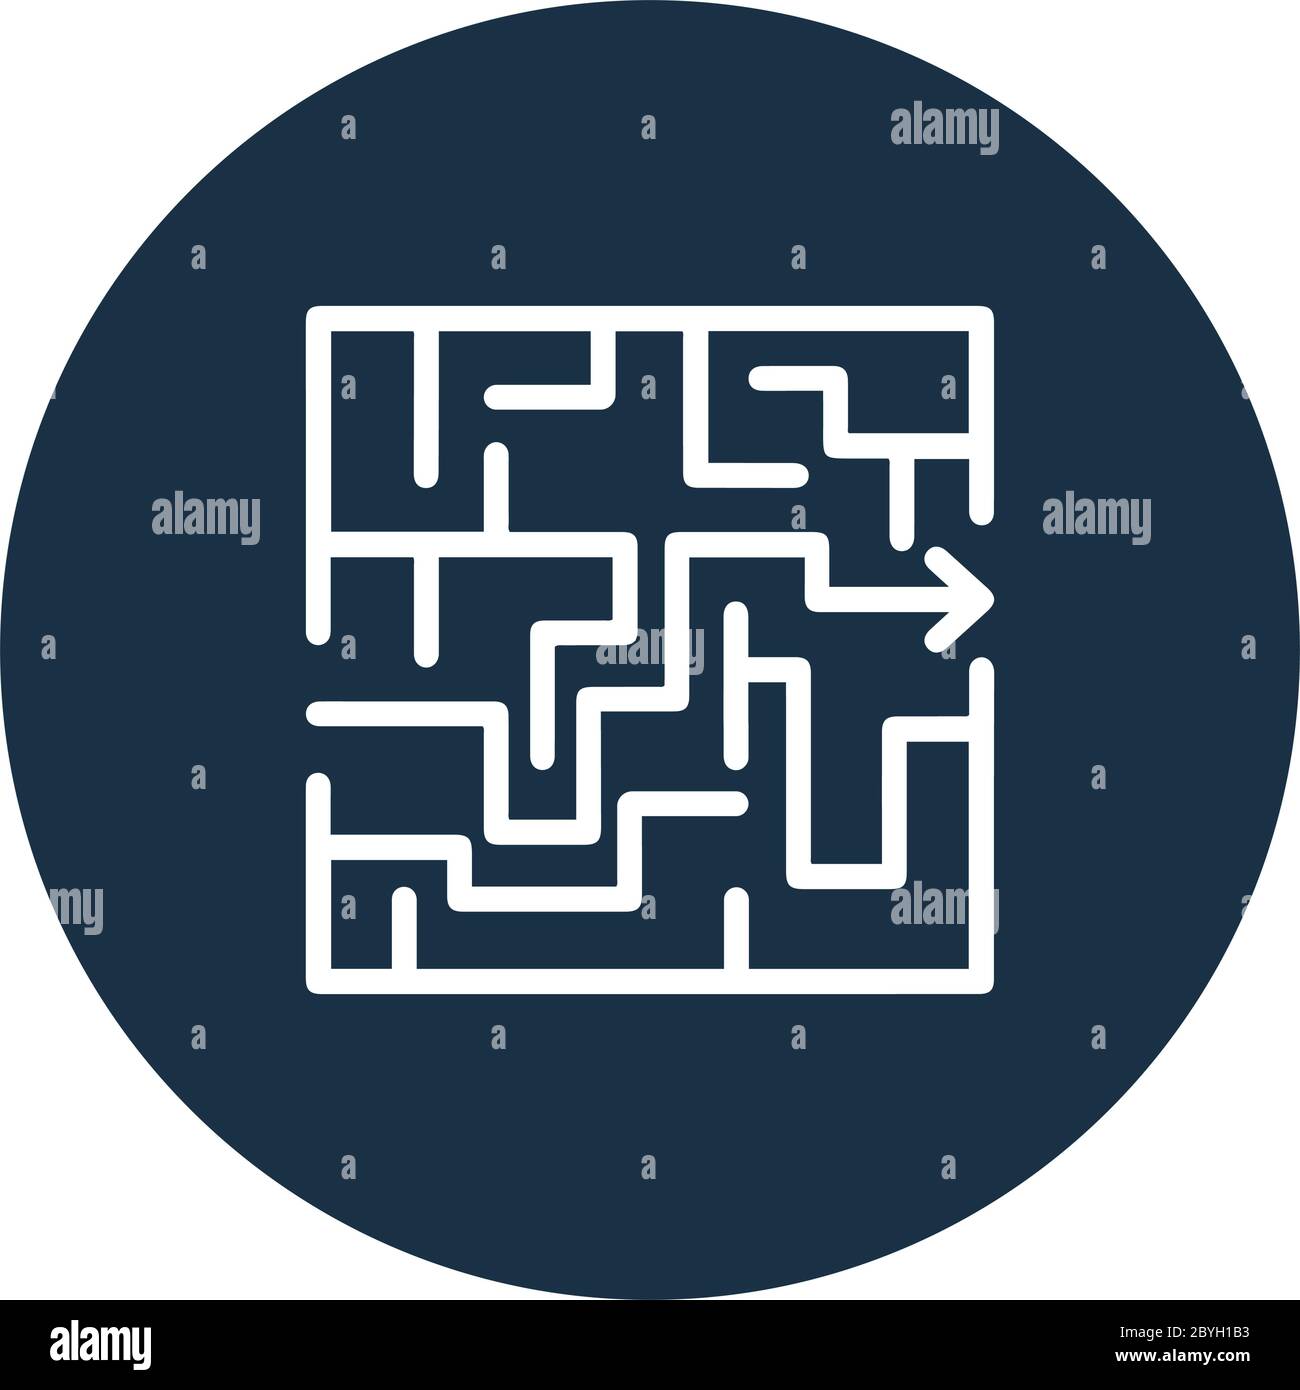 Beautiful design and fully editable Strategy icon, Labyrinth, maze, vector graphics for commercial, print media, web or any type of design projects. Stock Vector